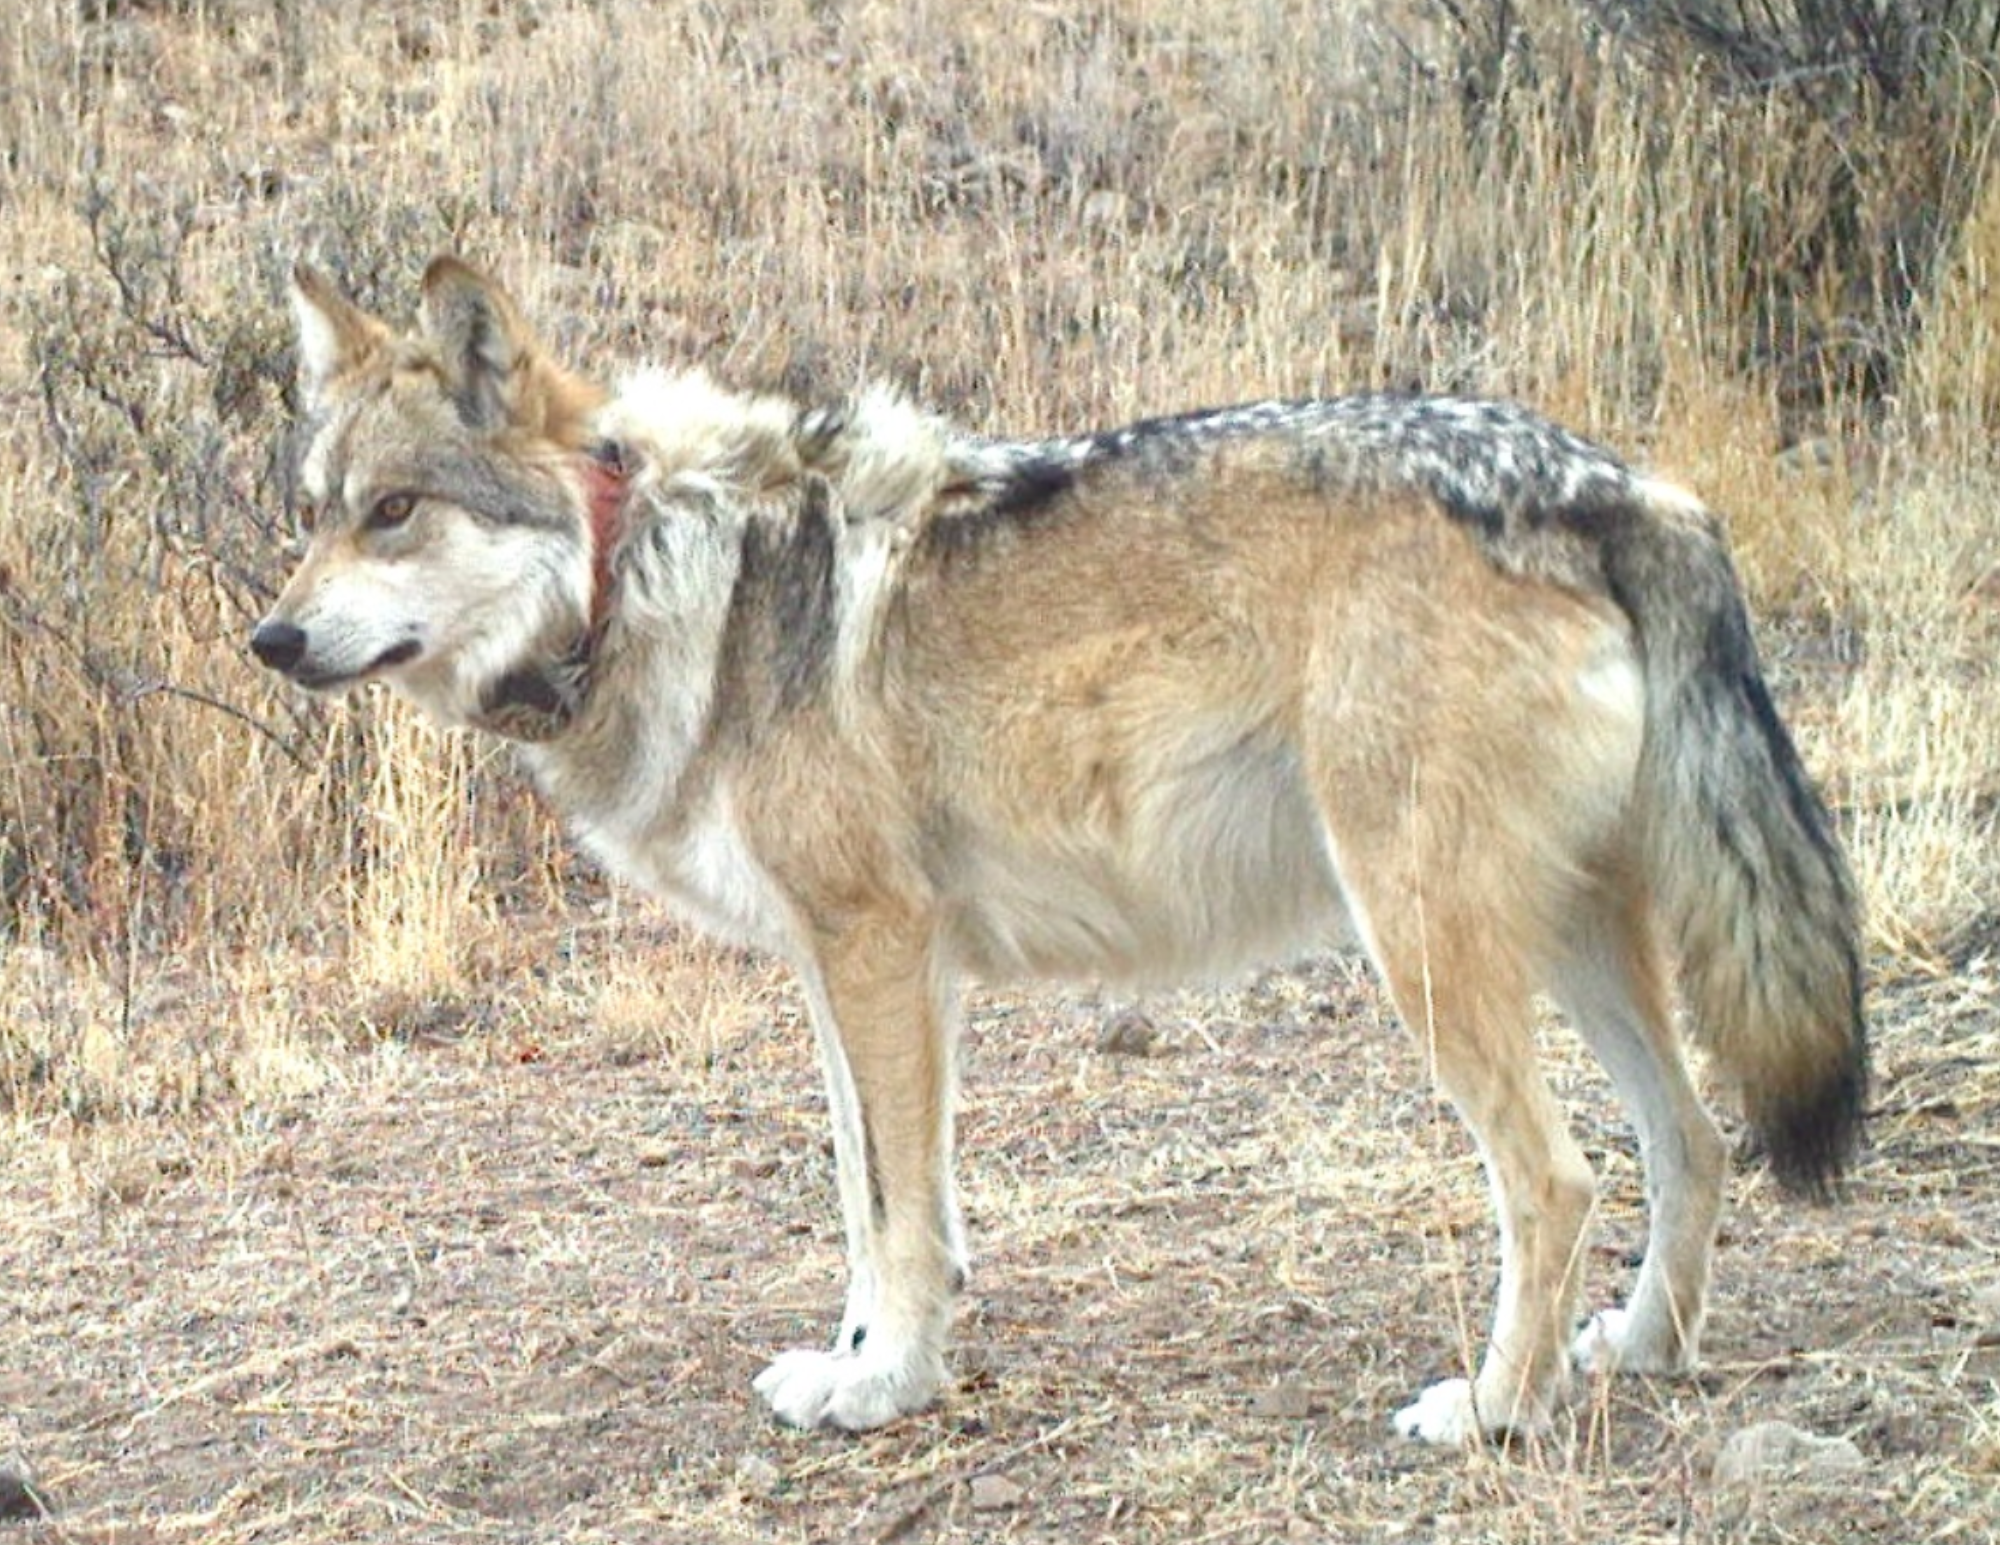 Reward Offered For Information Leading to Conviction of Killer in Mexican Gray Wolf Death